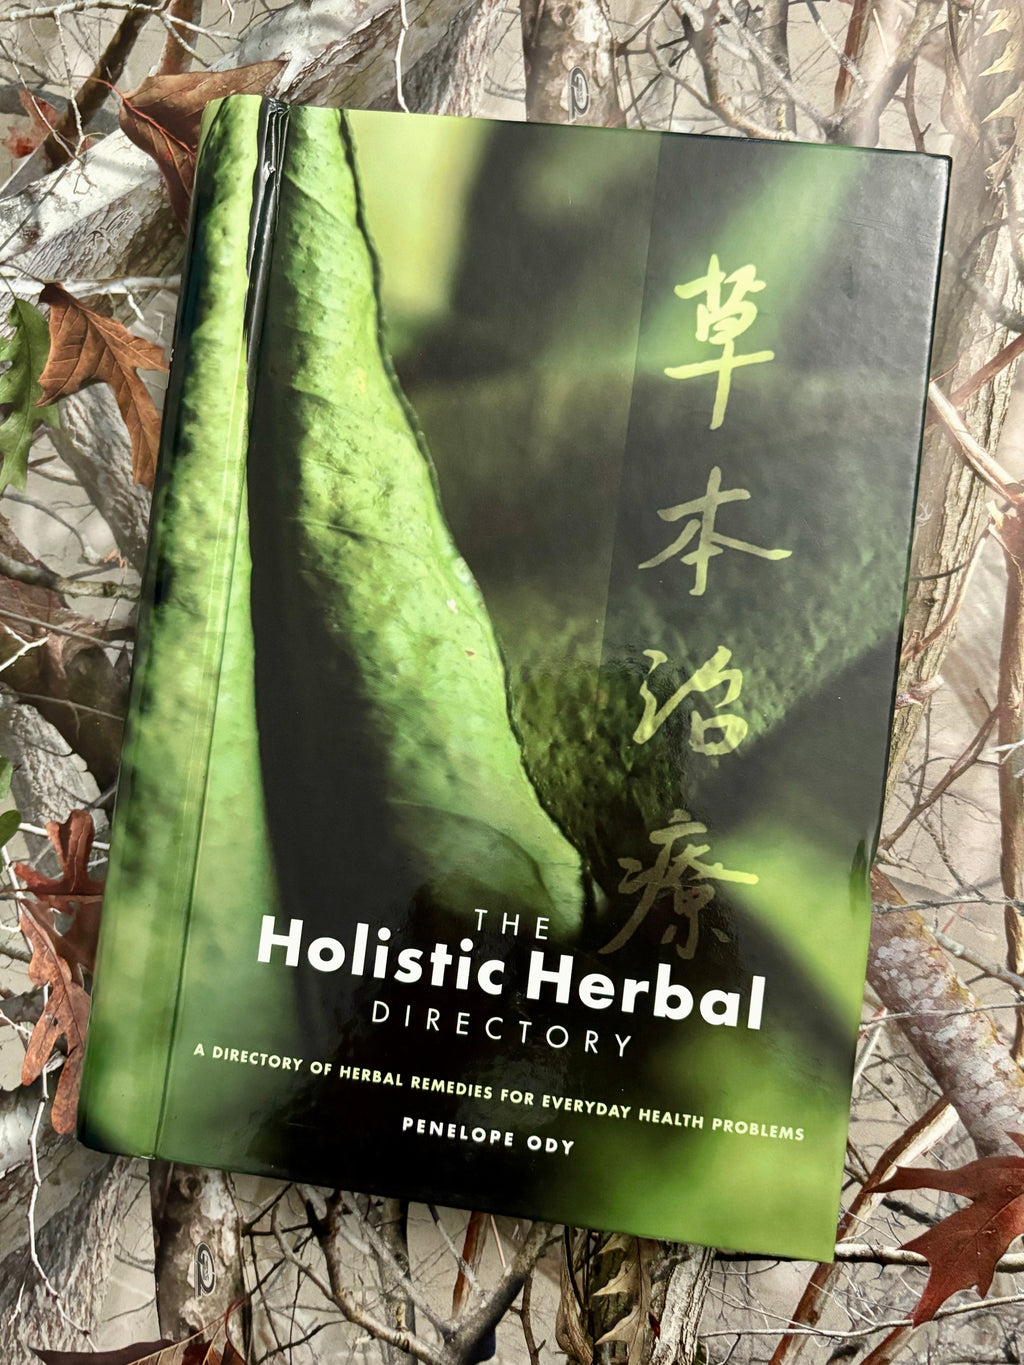 The Holistic Herbal Directory- By Penelope Ody